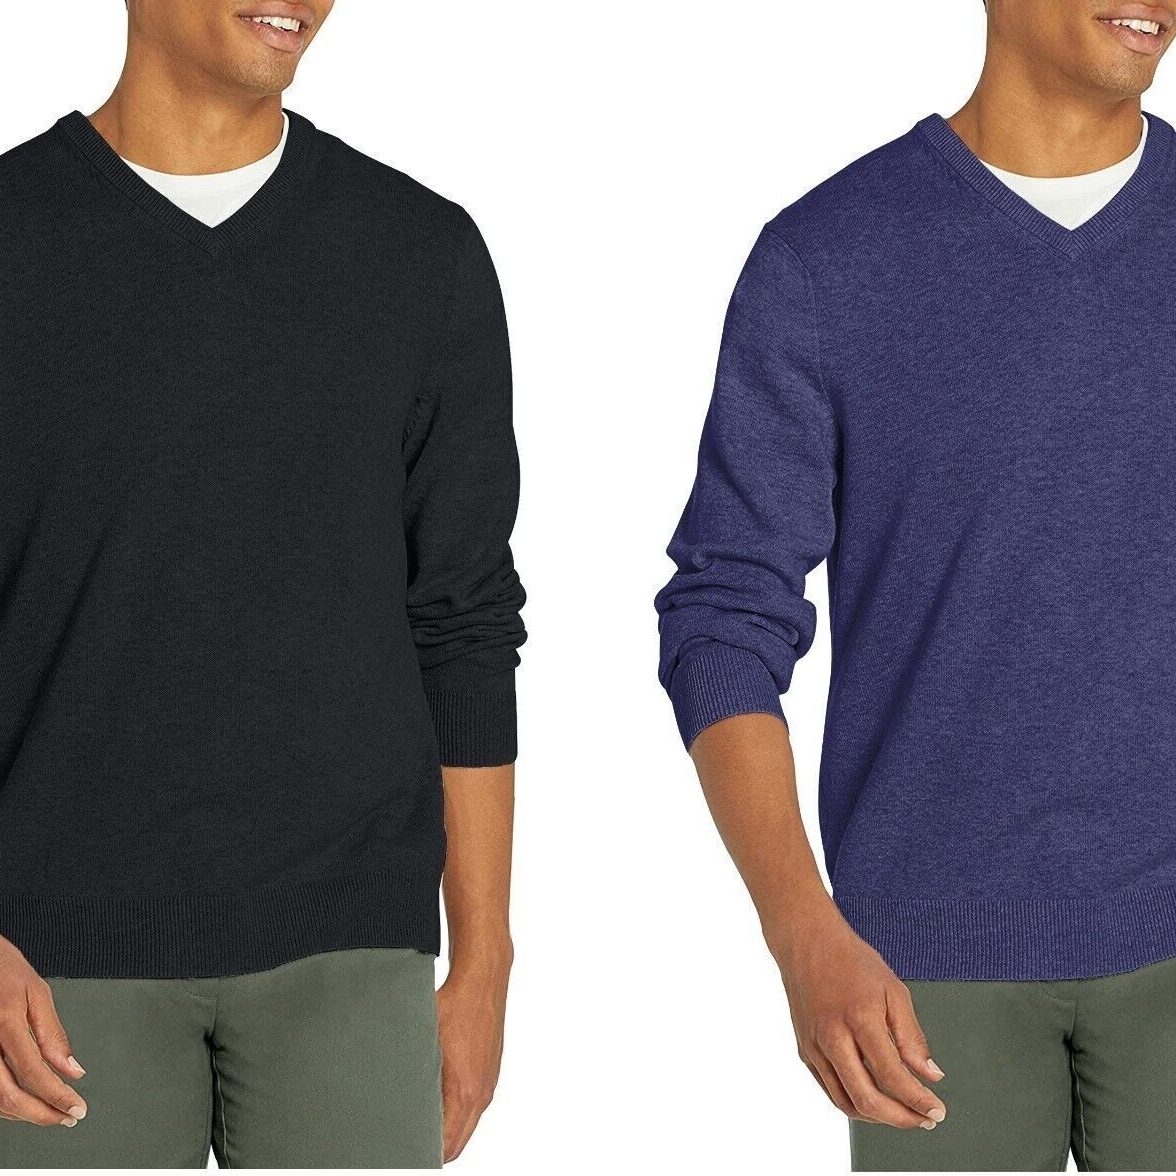 2-Pack Men's Casual Cozy Ultra Soft Slim Fit Warm Knit Pullover V-Neck Sweater - Black&Blue, X-Large